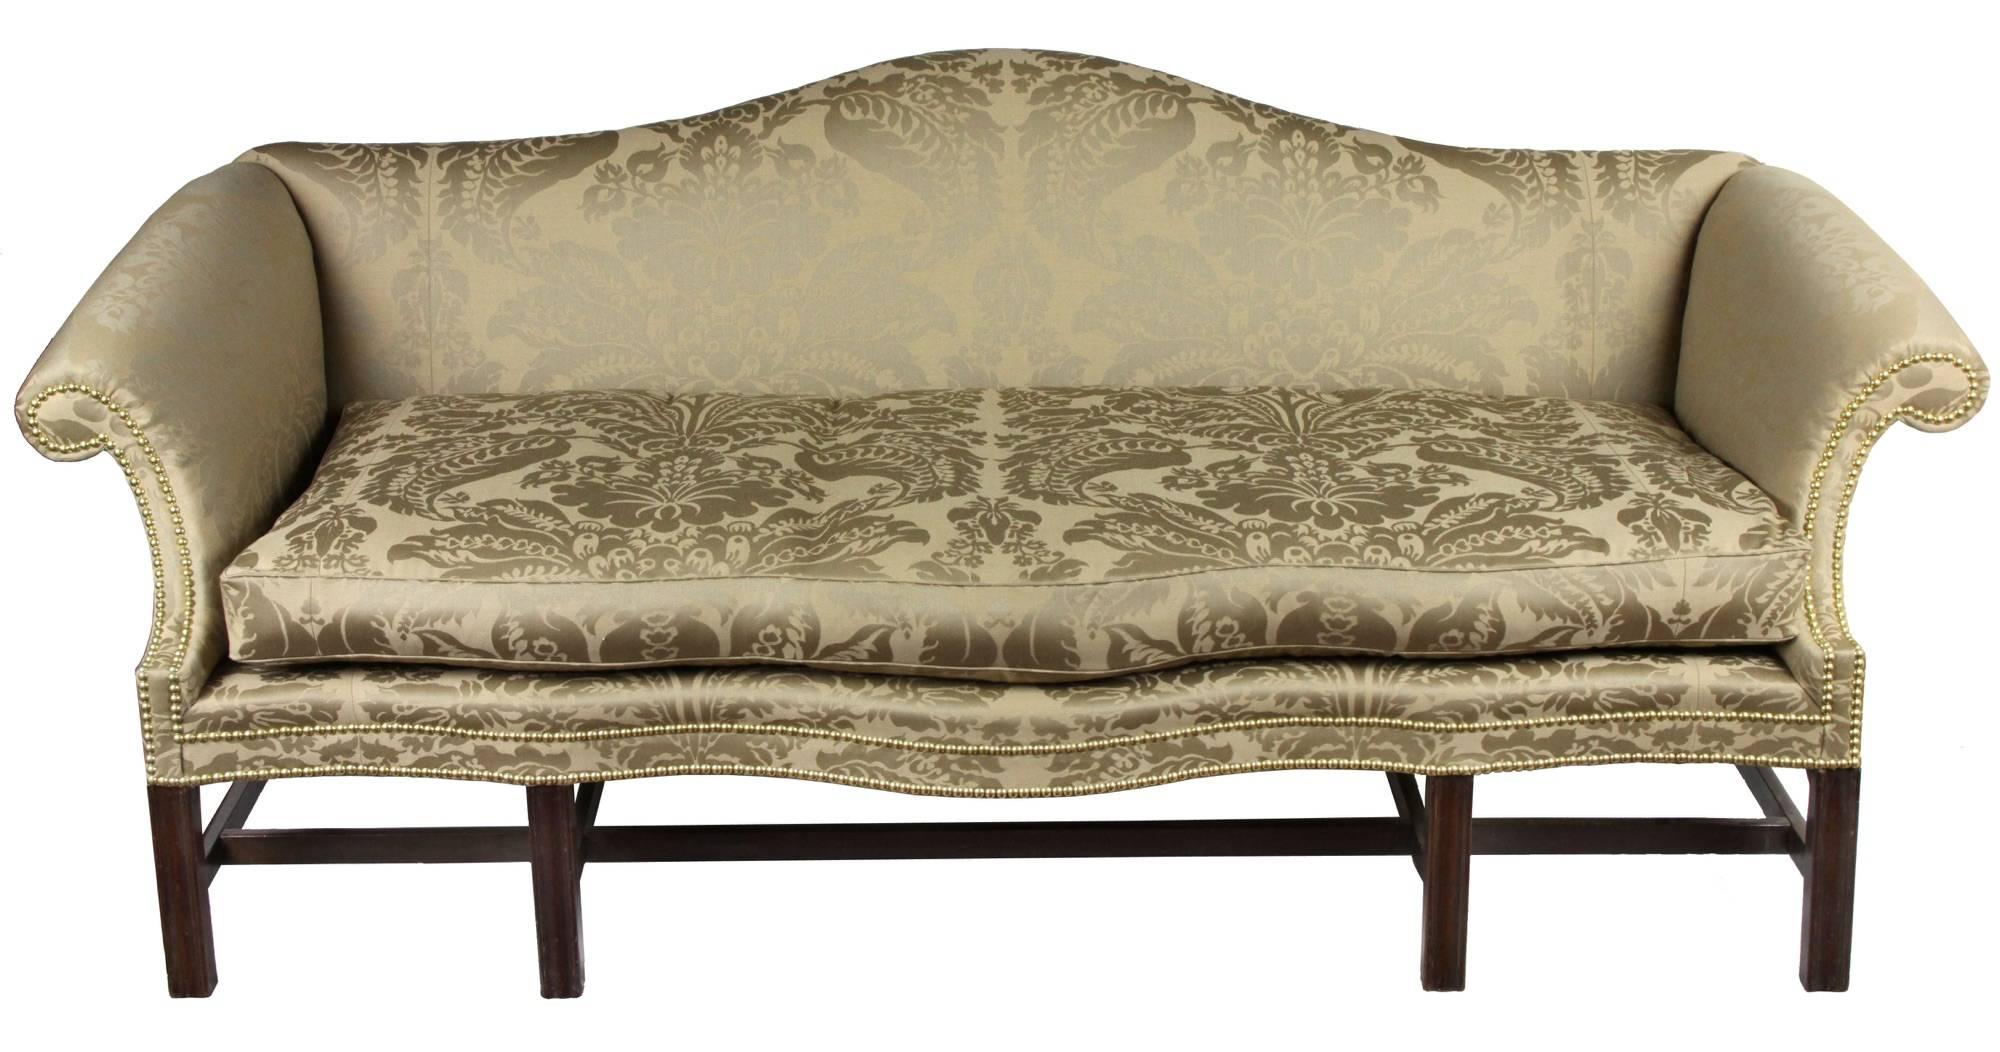 In the world of Chippendale sofas in the colonies, Philadelphia was always a source of standout work and design, and closest to high style English models.  The Philadelphia look is in the outward shaping of the arms, and also the accentuated shapely